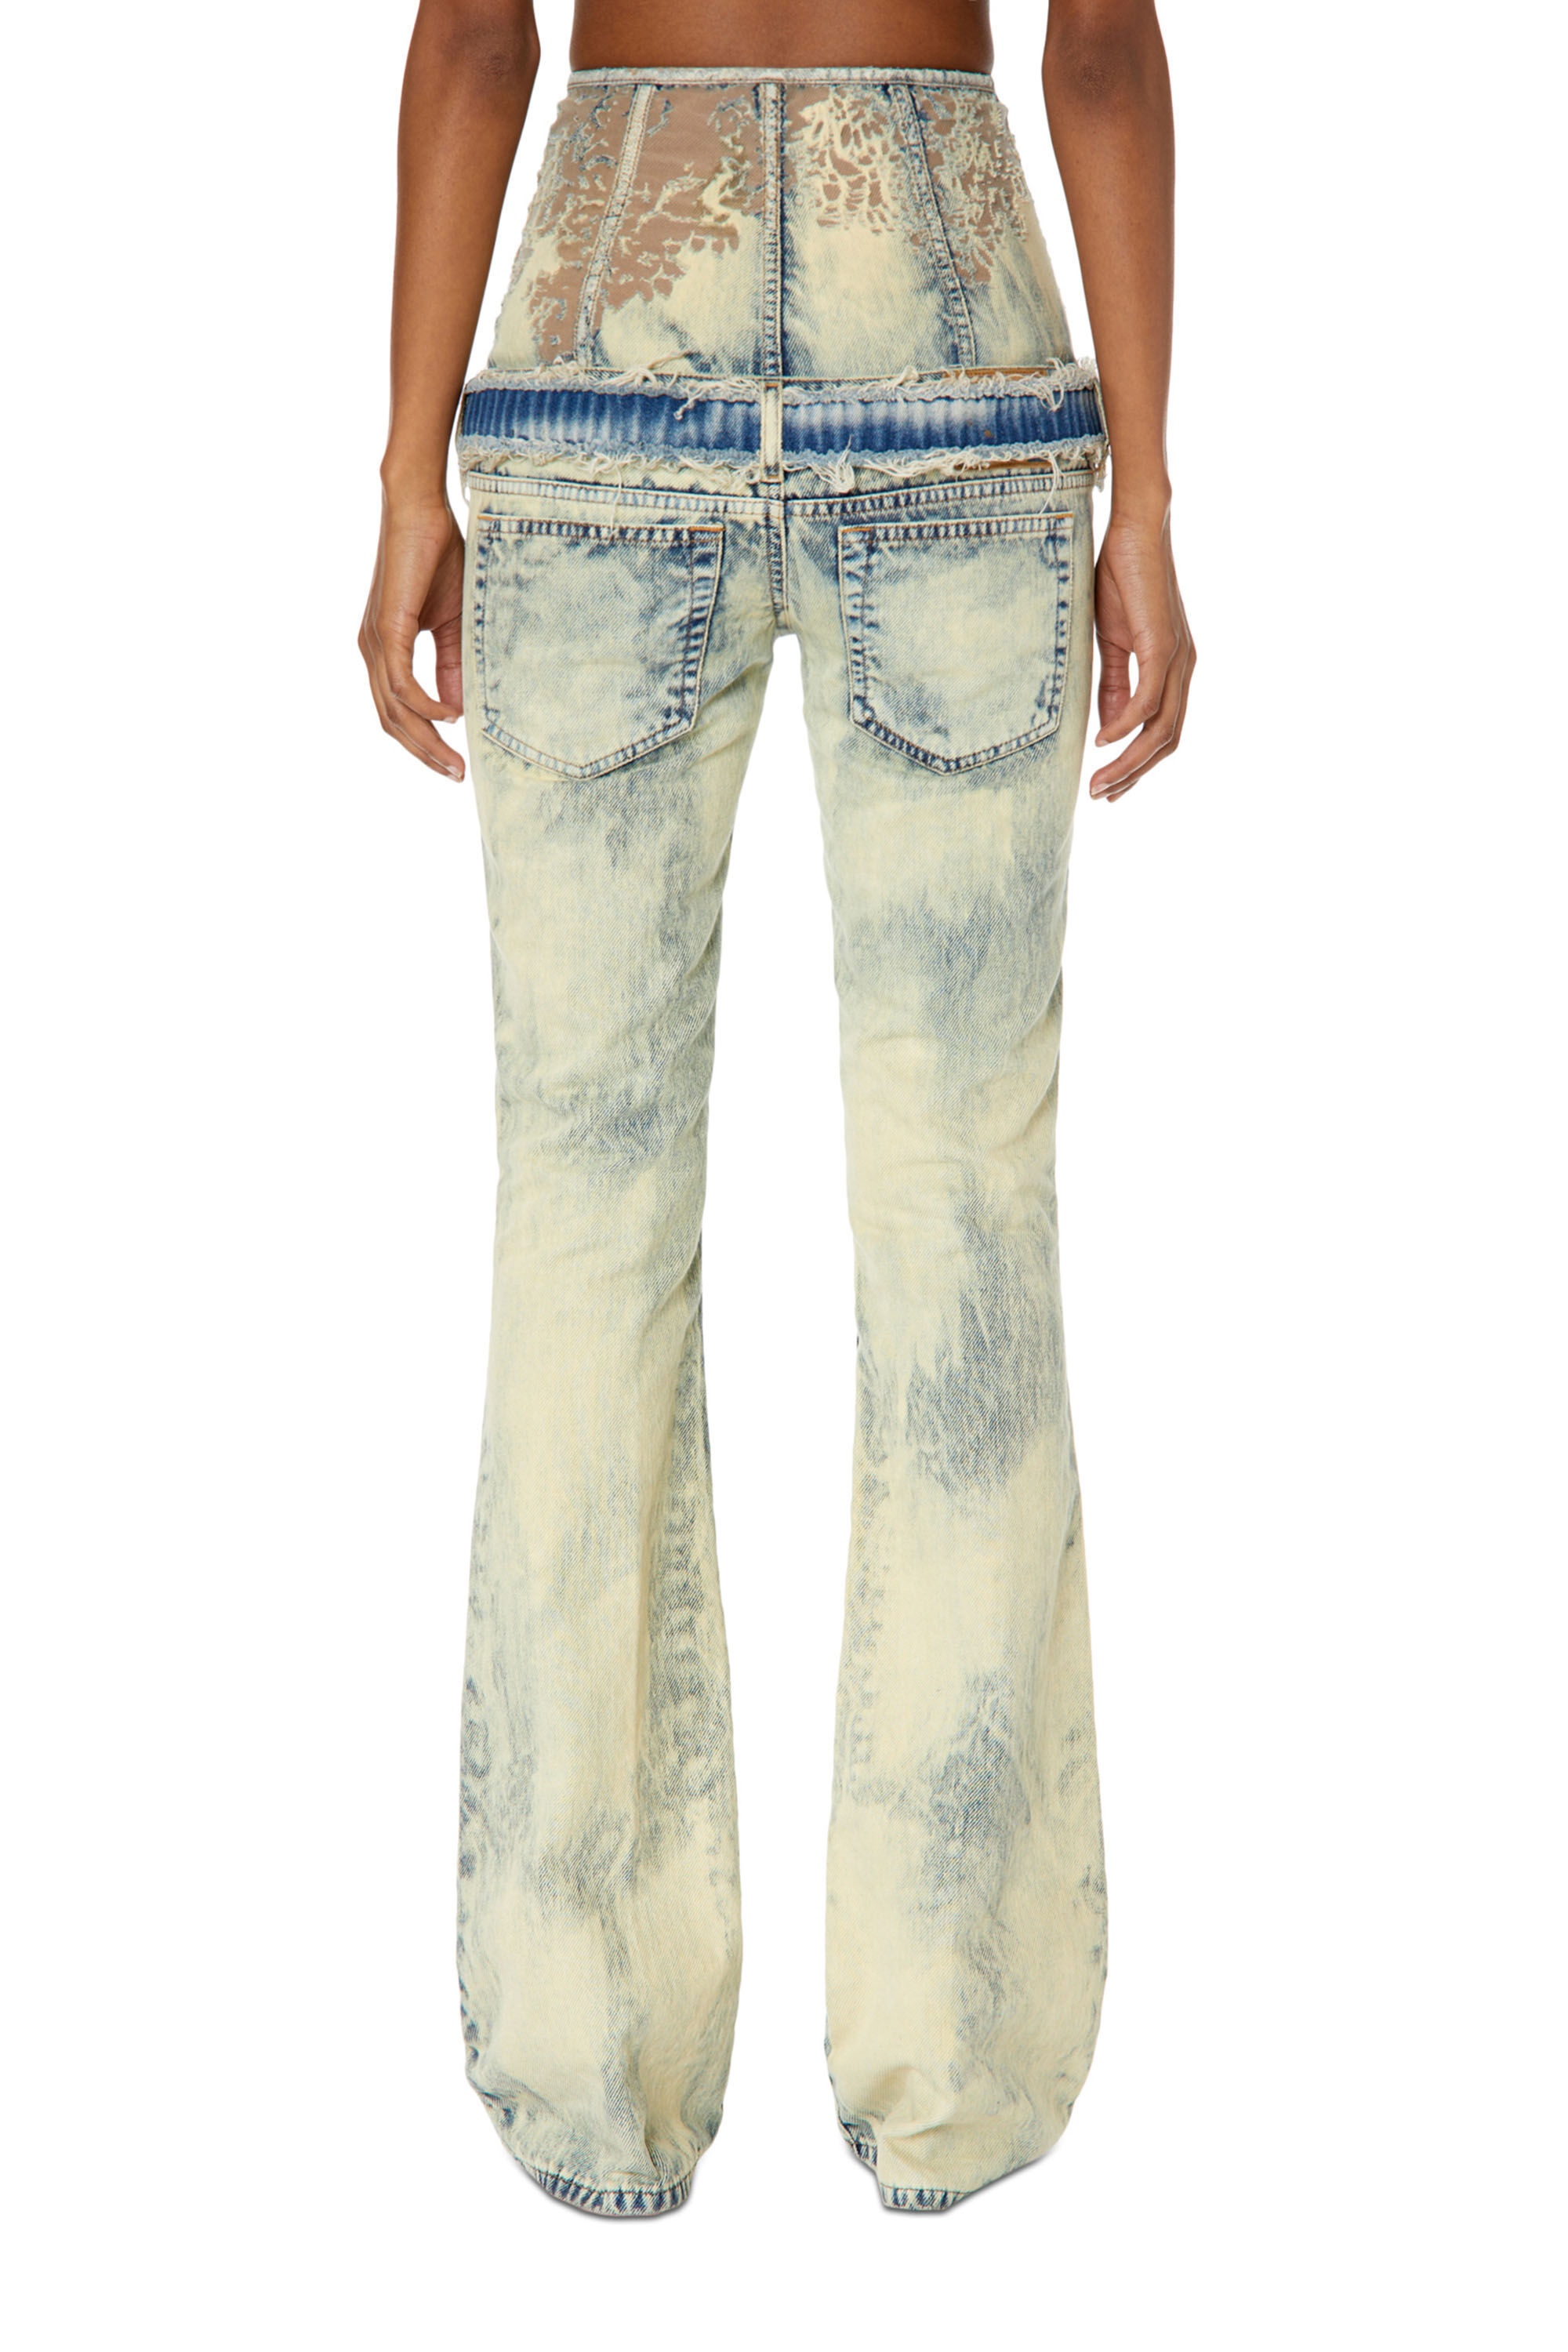 BOOTCUT AND FLARE JEANS 1969 D-EBBEY 068GP - 5